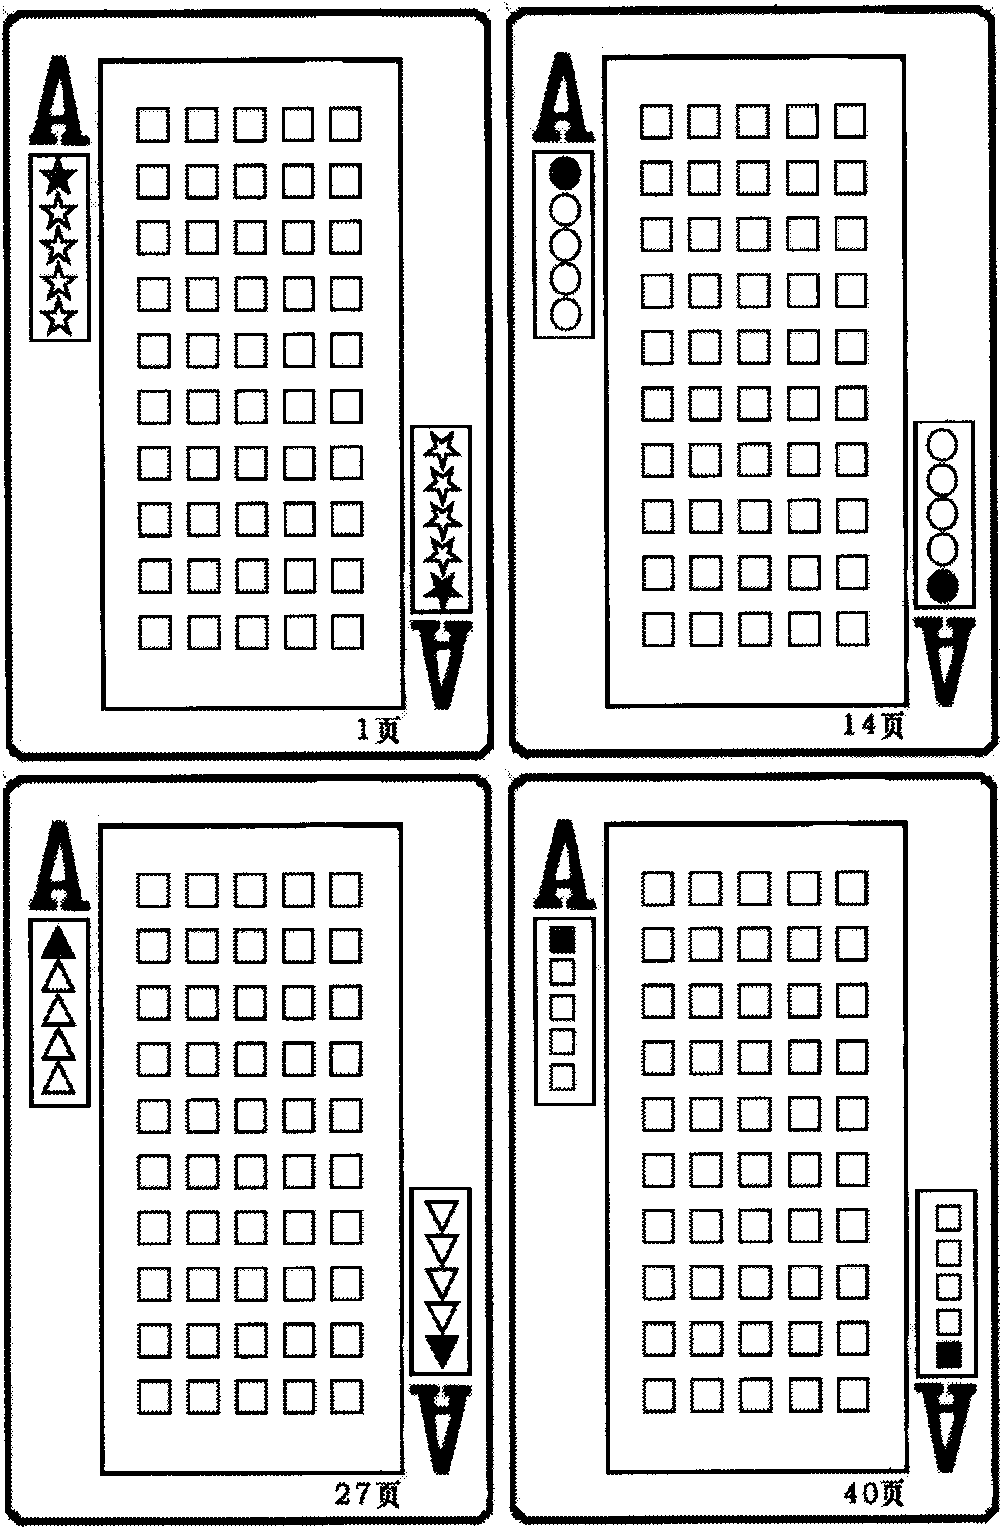 Changeful-suit playing cards with page numbers